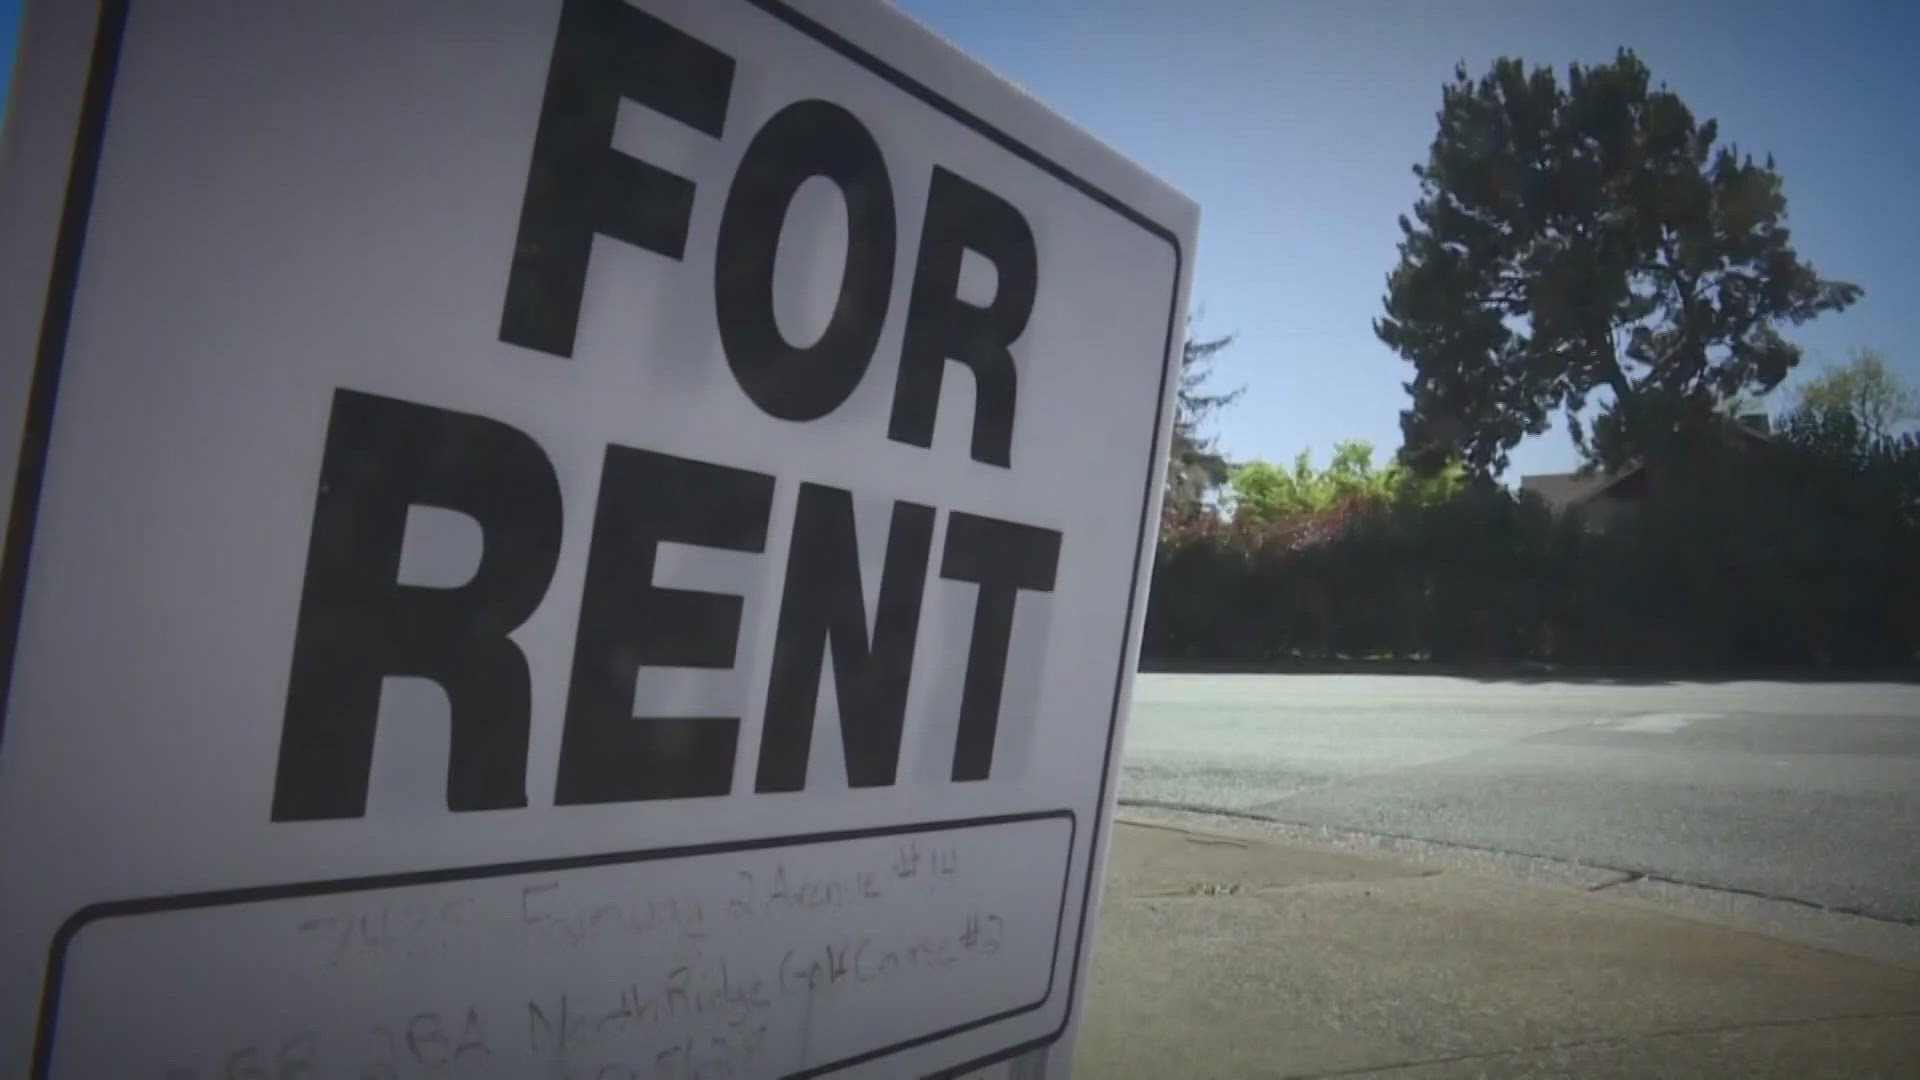 Here are some tips to save on the price of rent as the housing market cools off.